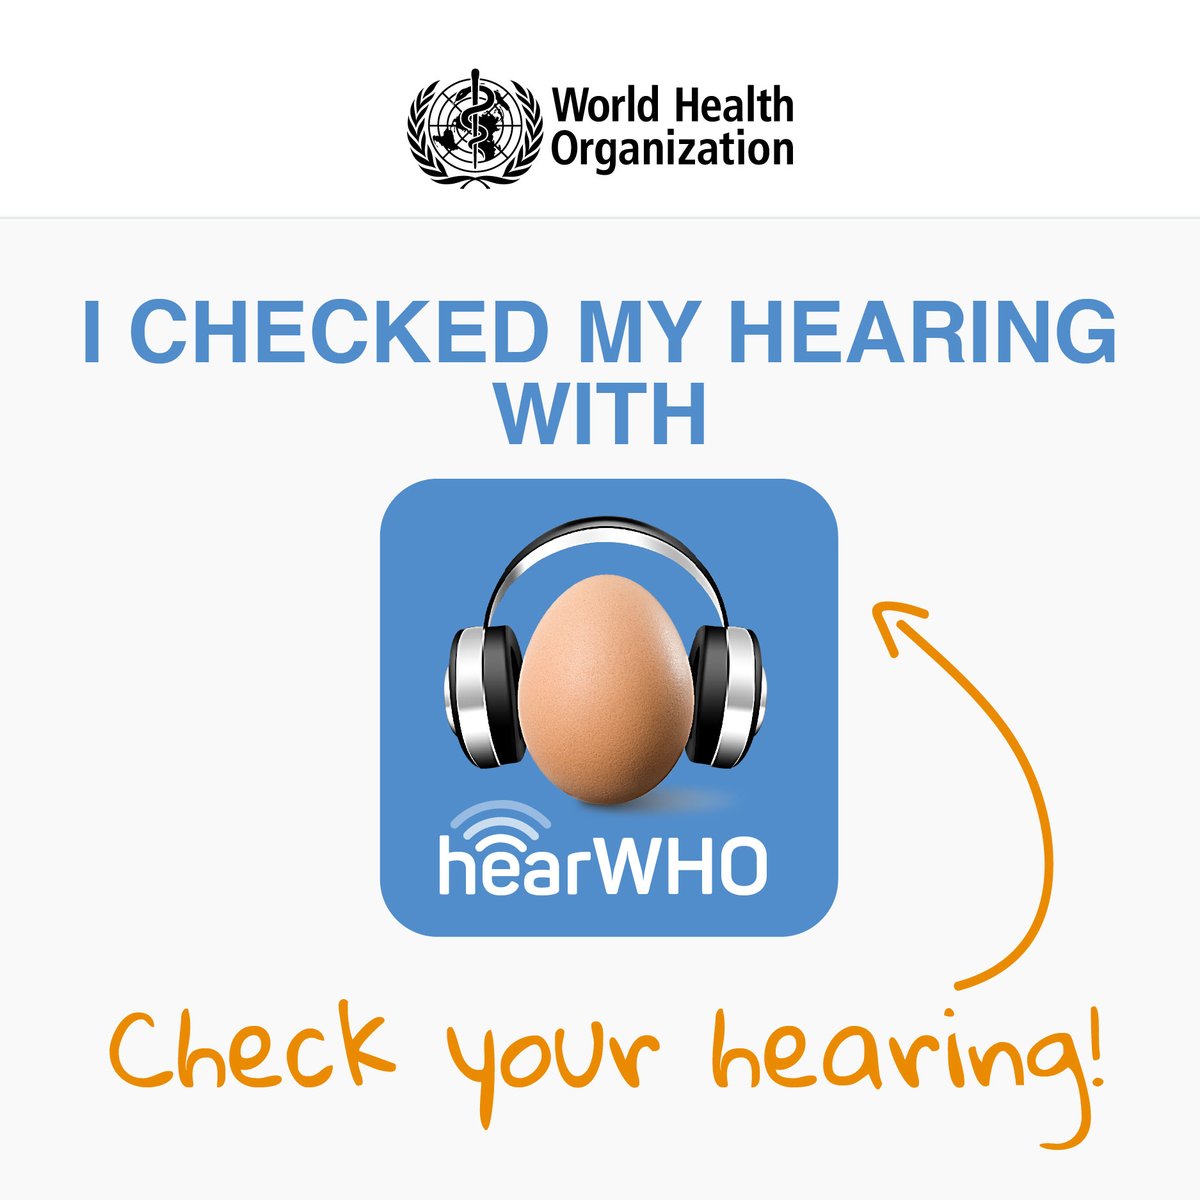 If you have difficulty hearing or experience persistent ringing in your ear (tinnitus), use the hearWHO app to check your hearing. Contact your healthcare provider if you fail the hearing check or have signs of hearing loss 👉bit.ly/3C8JBAZ #WorldHearingDay